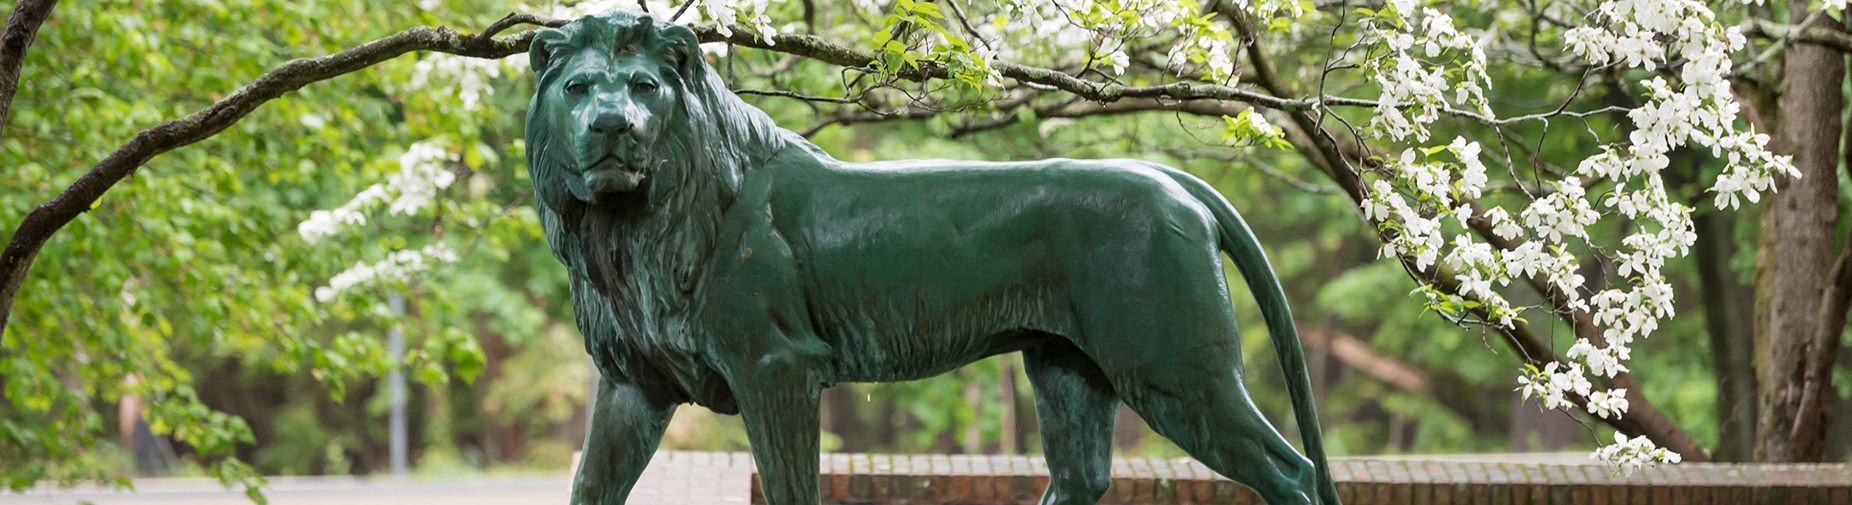 Sculpture of the lion in the garden